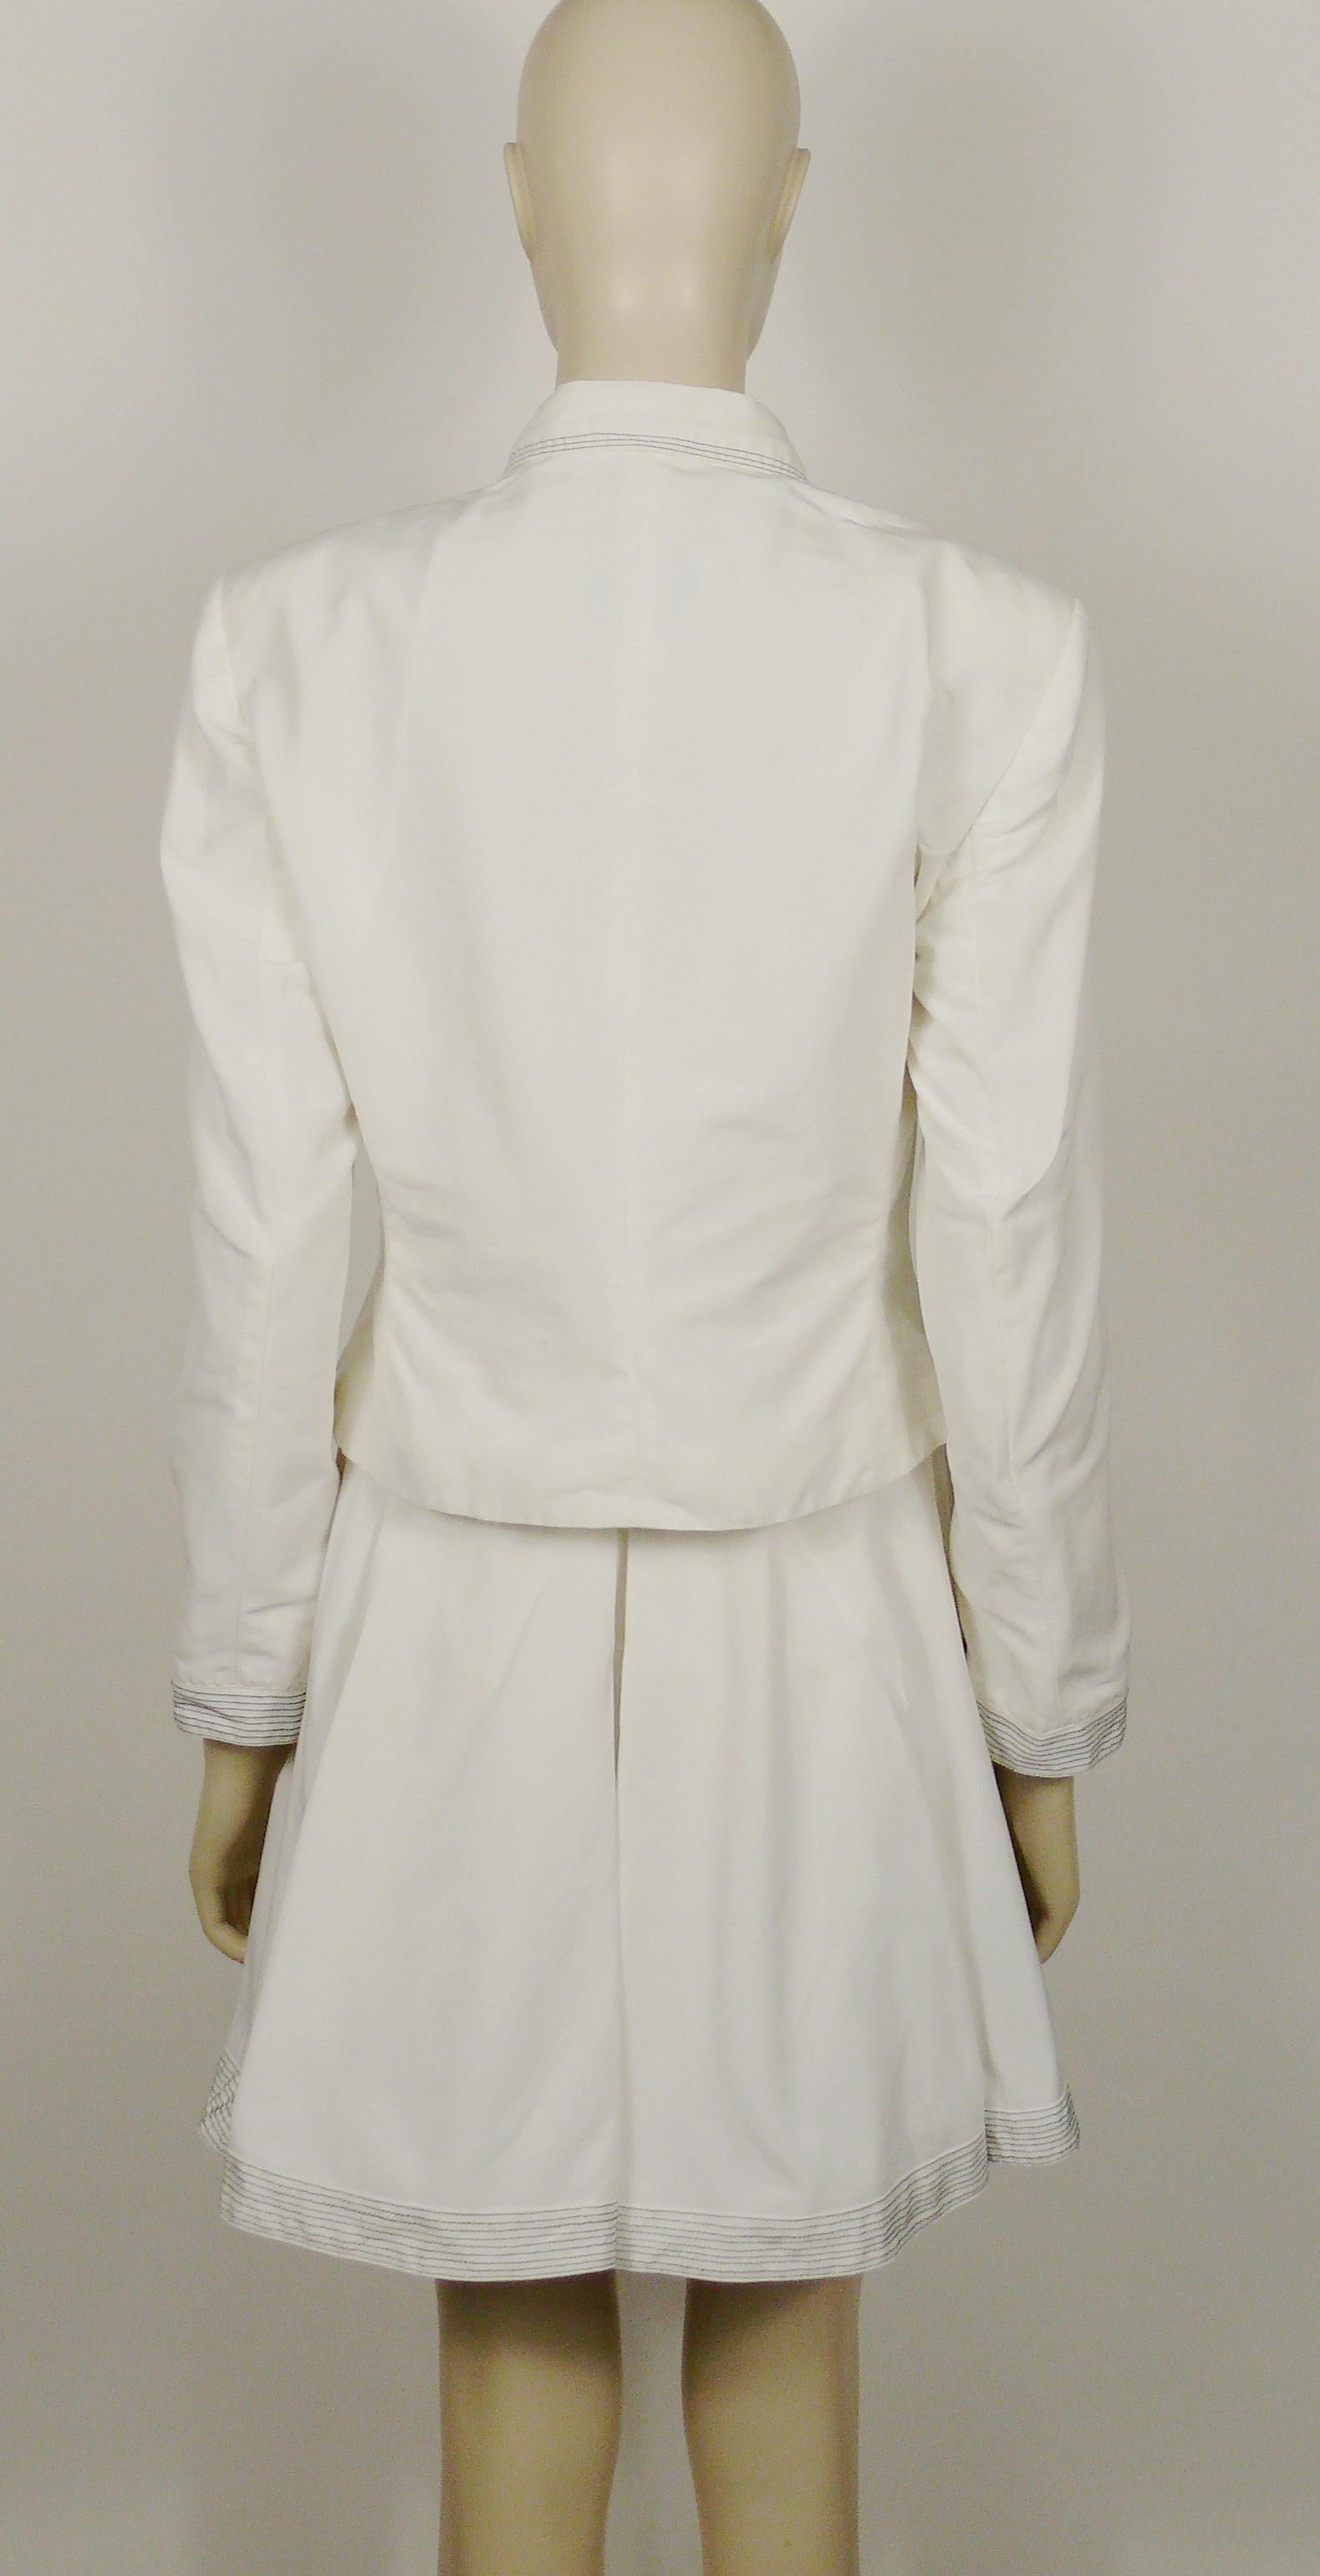 Gianni Versace Versus Vintage White Jacket & Skirt Ensemble with Western Details For Sale 1